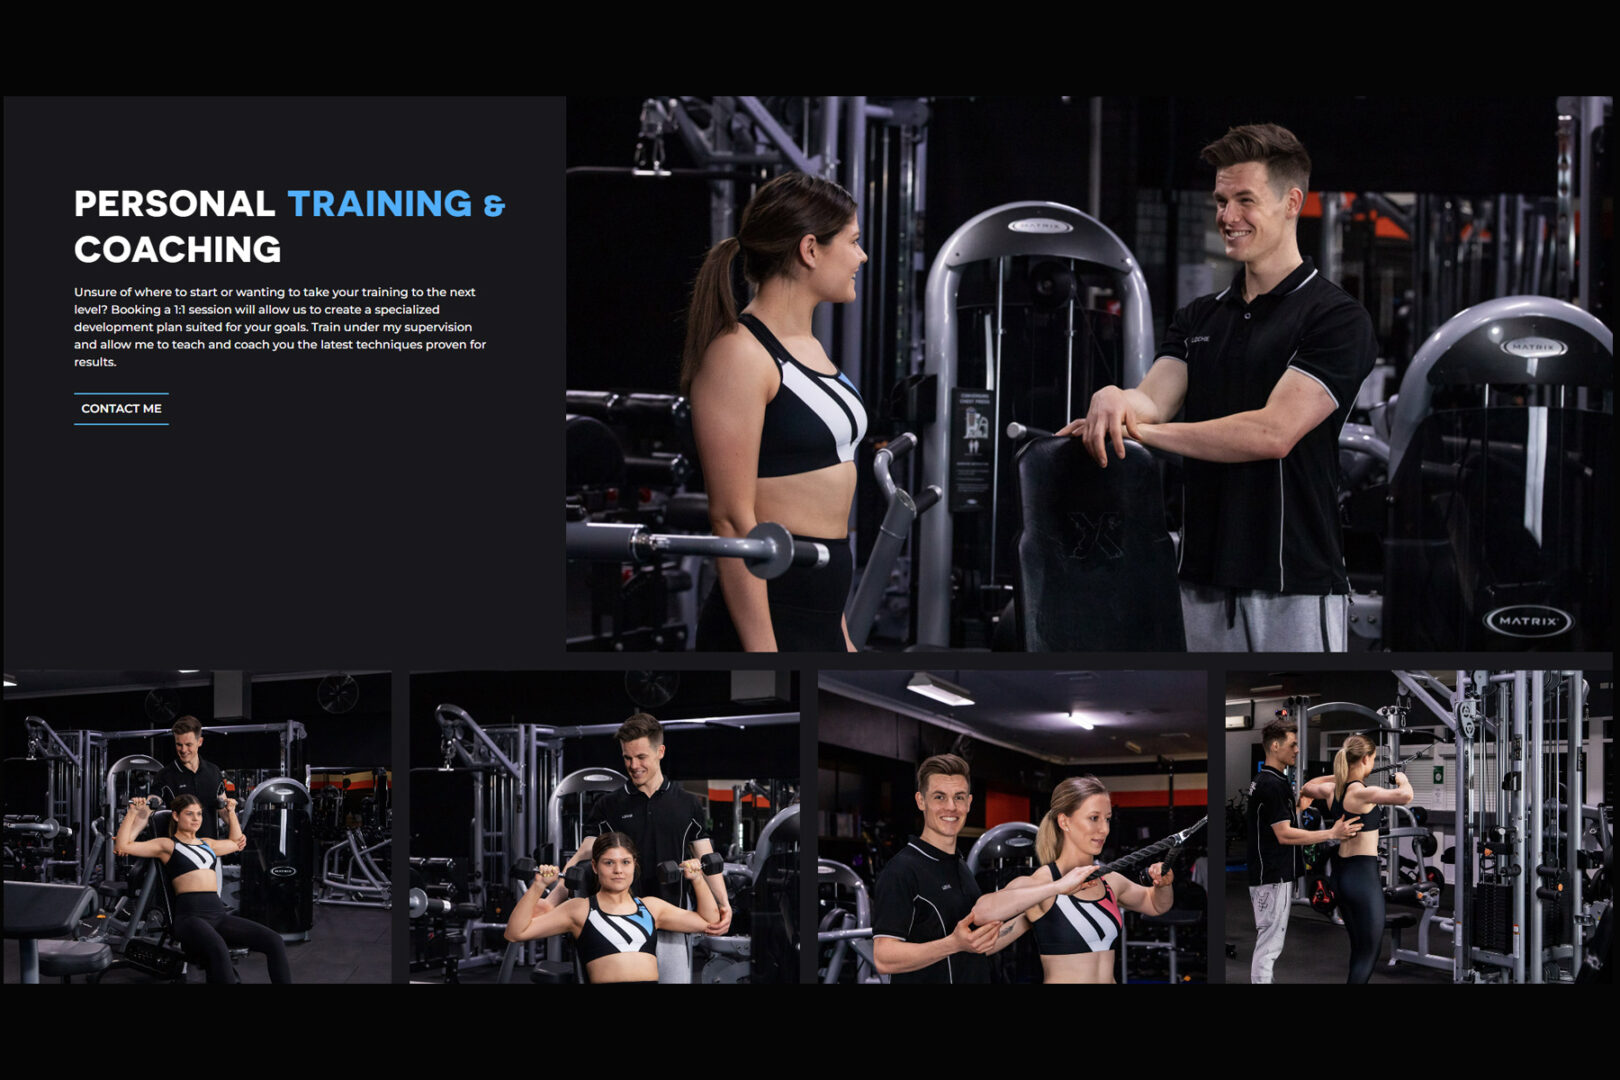 fitness, riverland, gym, healthy, promotional, customised, website, personal trainer, commercial, online